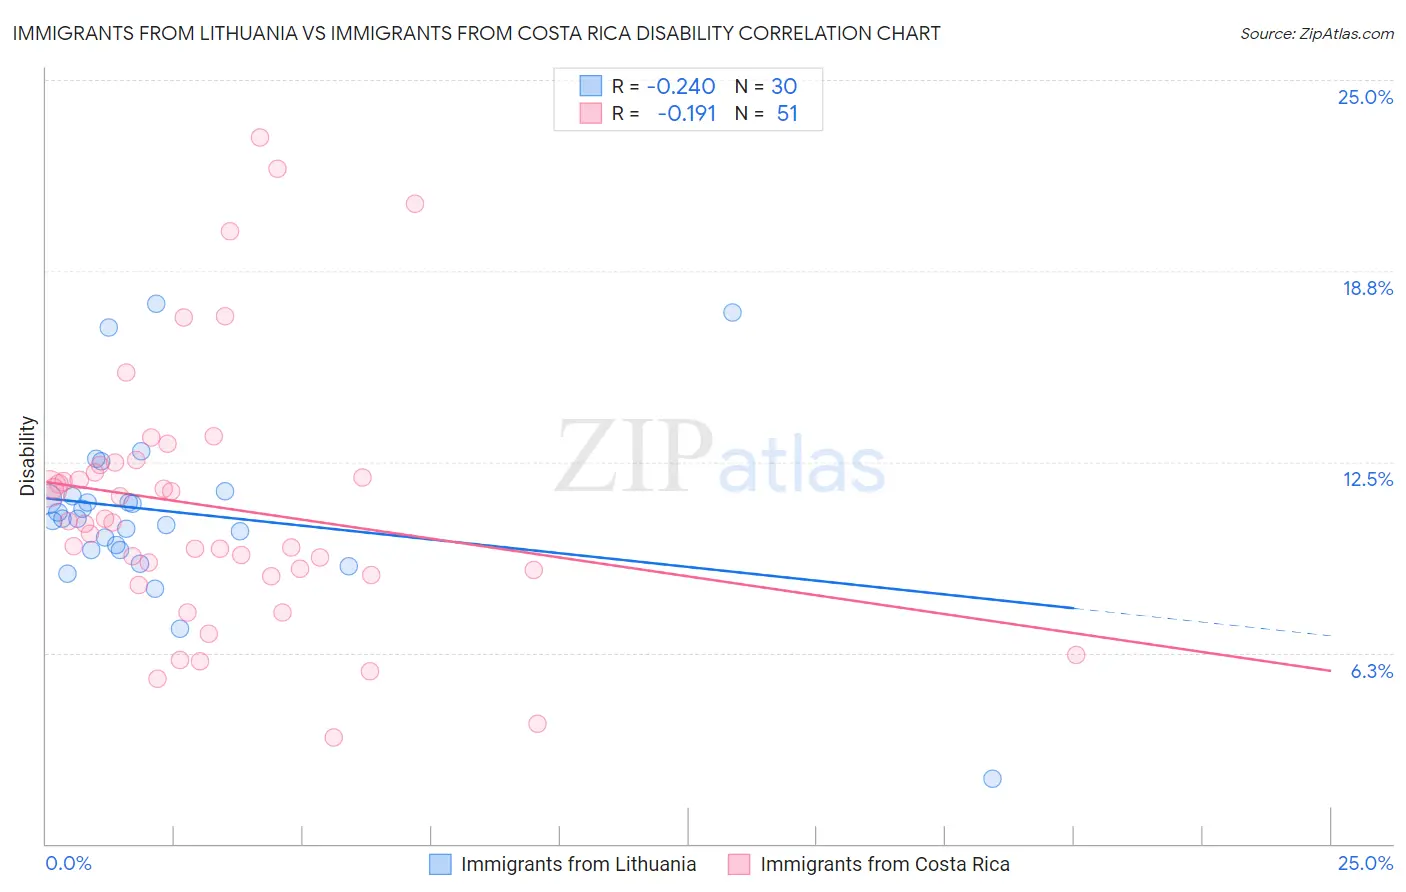 Immigrants from Lithuania vs Immigrants from Costa Rica Disability